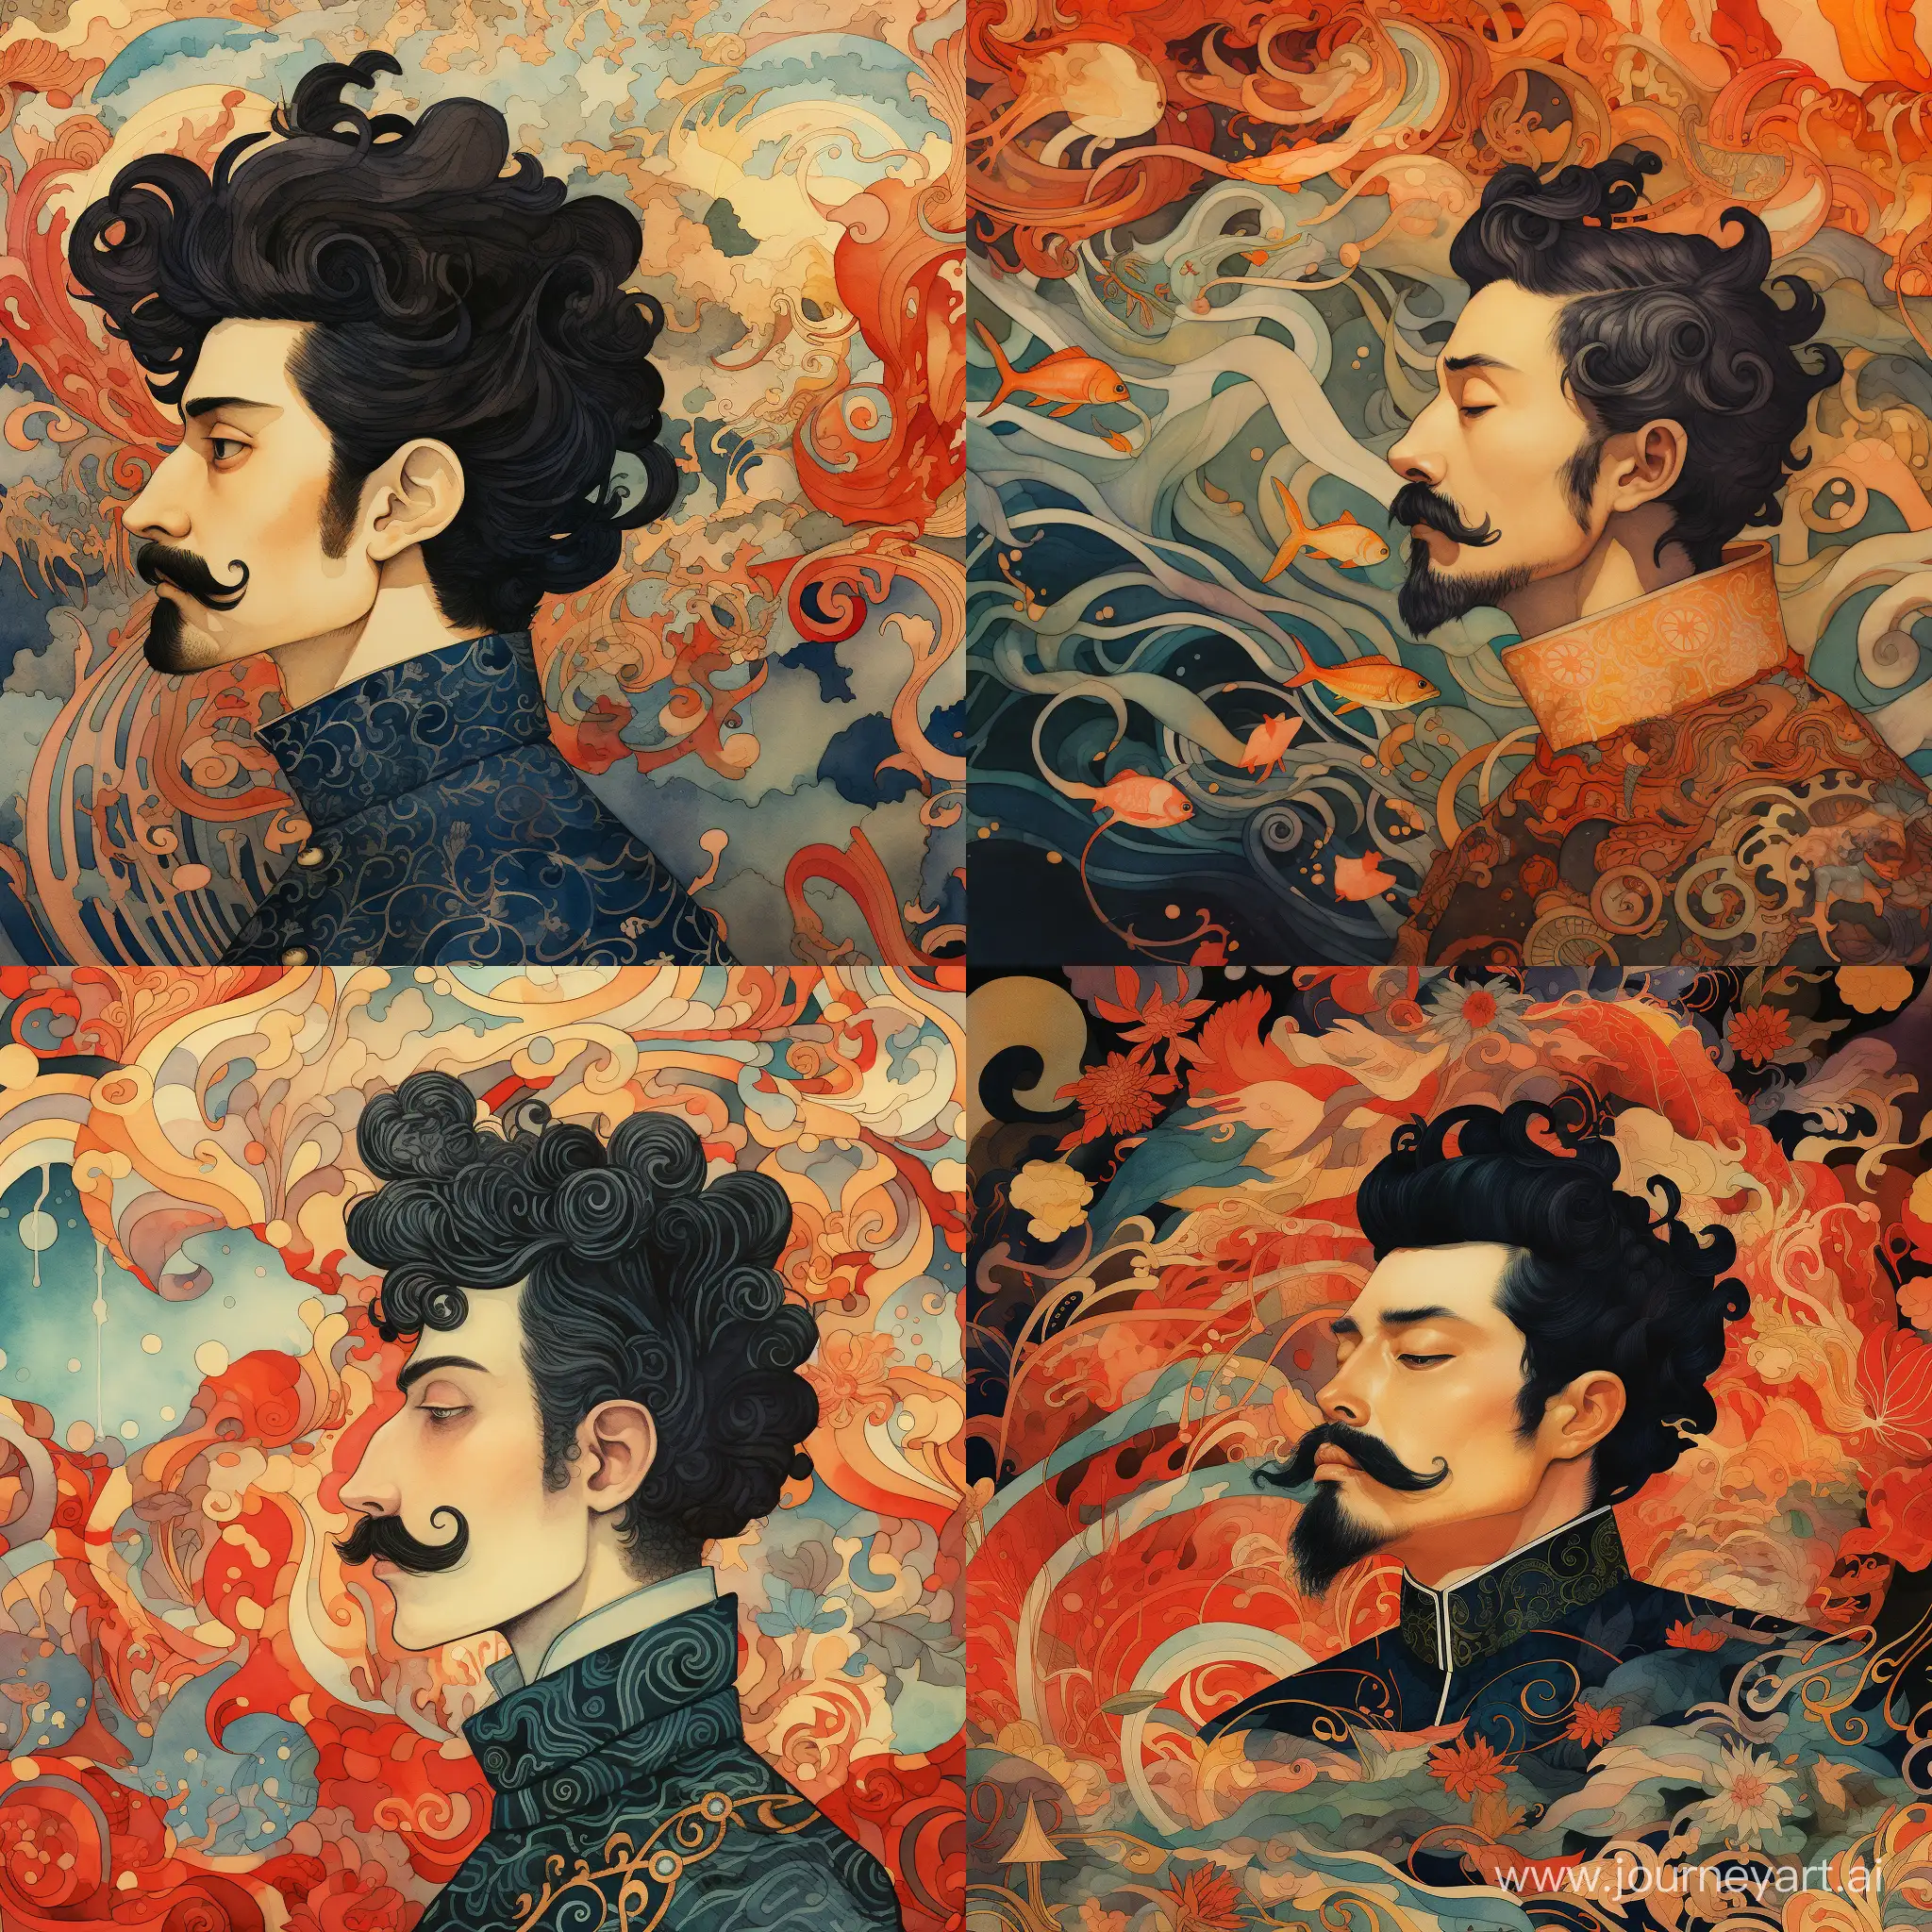 Regal-BlackHaired-King-in-Profile-Amidst-Club-Pattern-A-Stylized-Victo-Ngaiinspired-Portrait